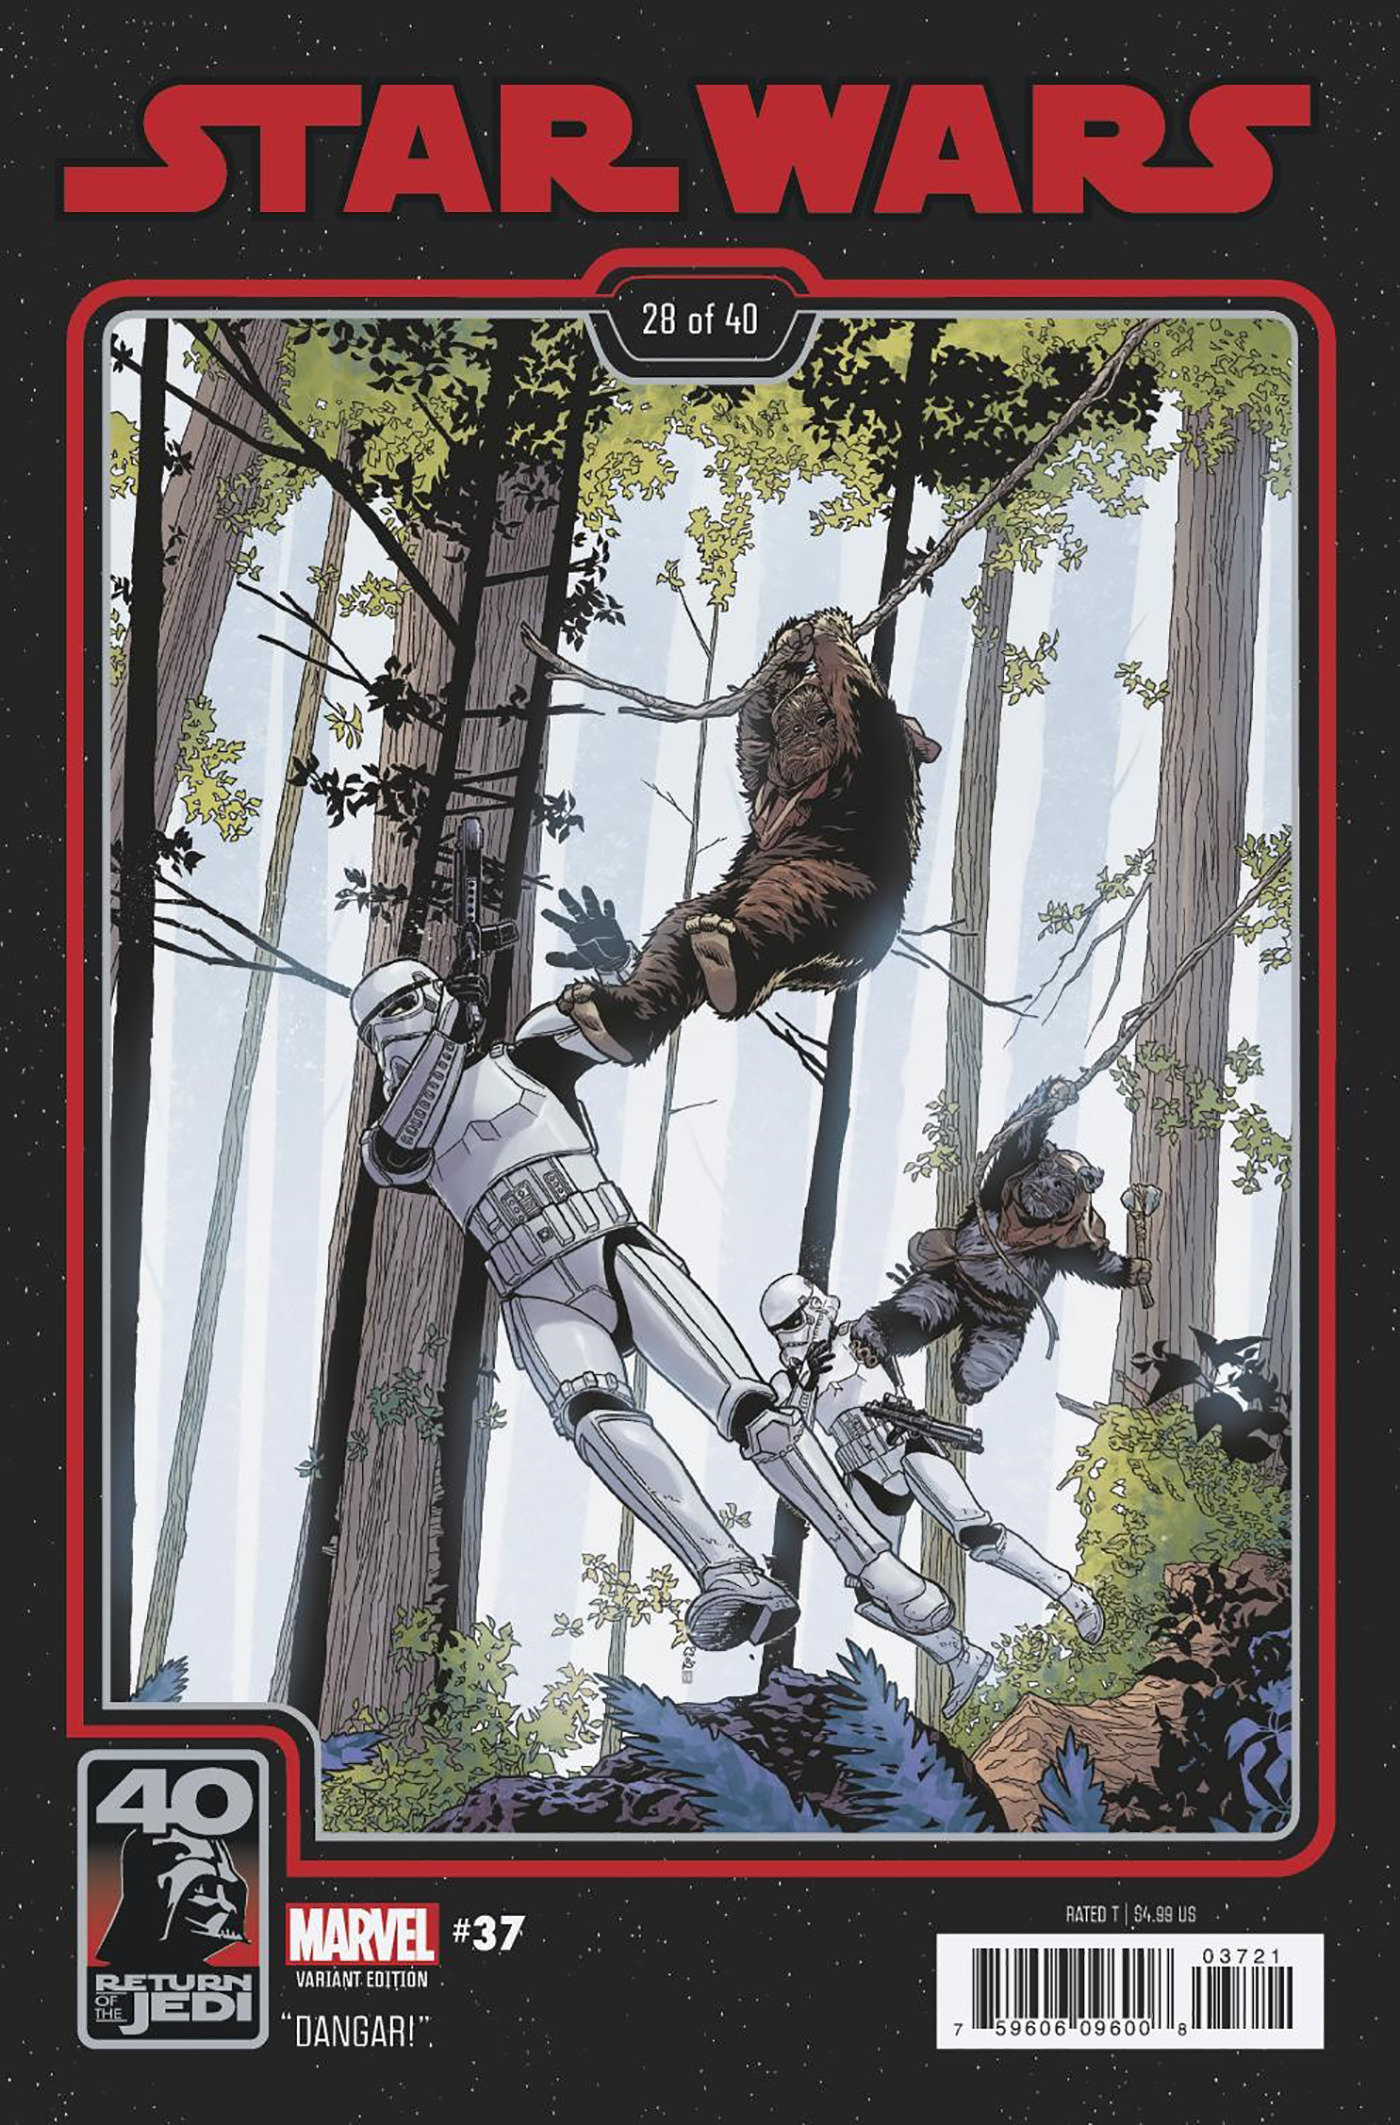 Star Wars #37 Chris Sprouse Return of the Jedi 40th Anniversary Variant (Dark Droids)